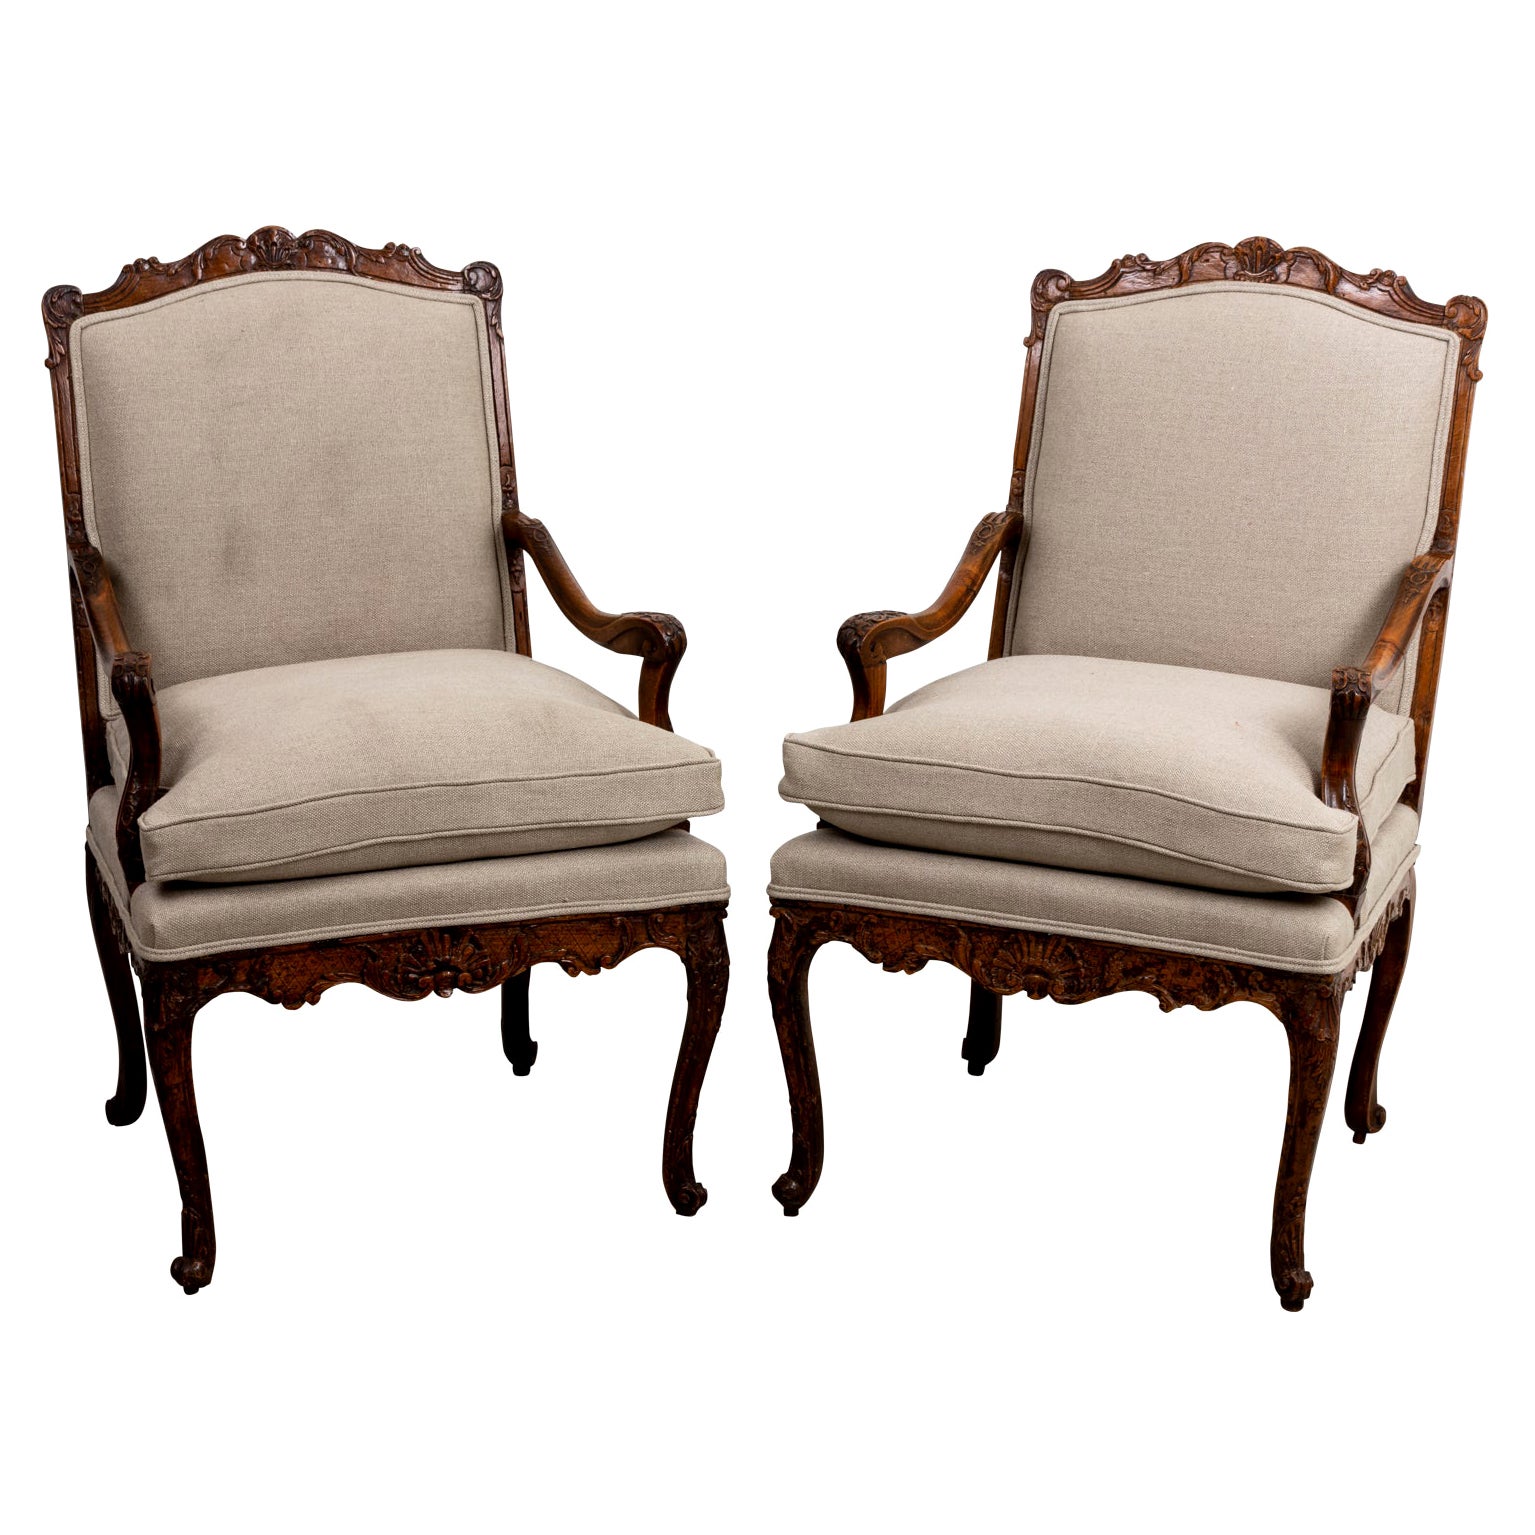 Pair of Early 19th Century French Chairs For Sale